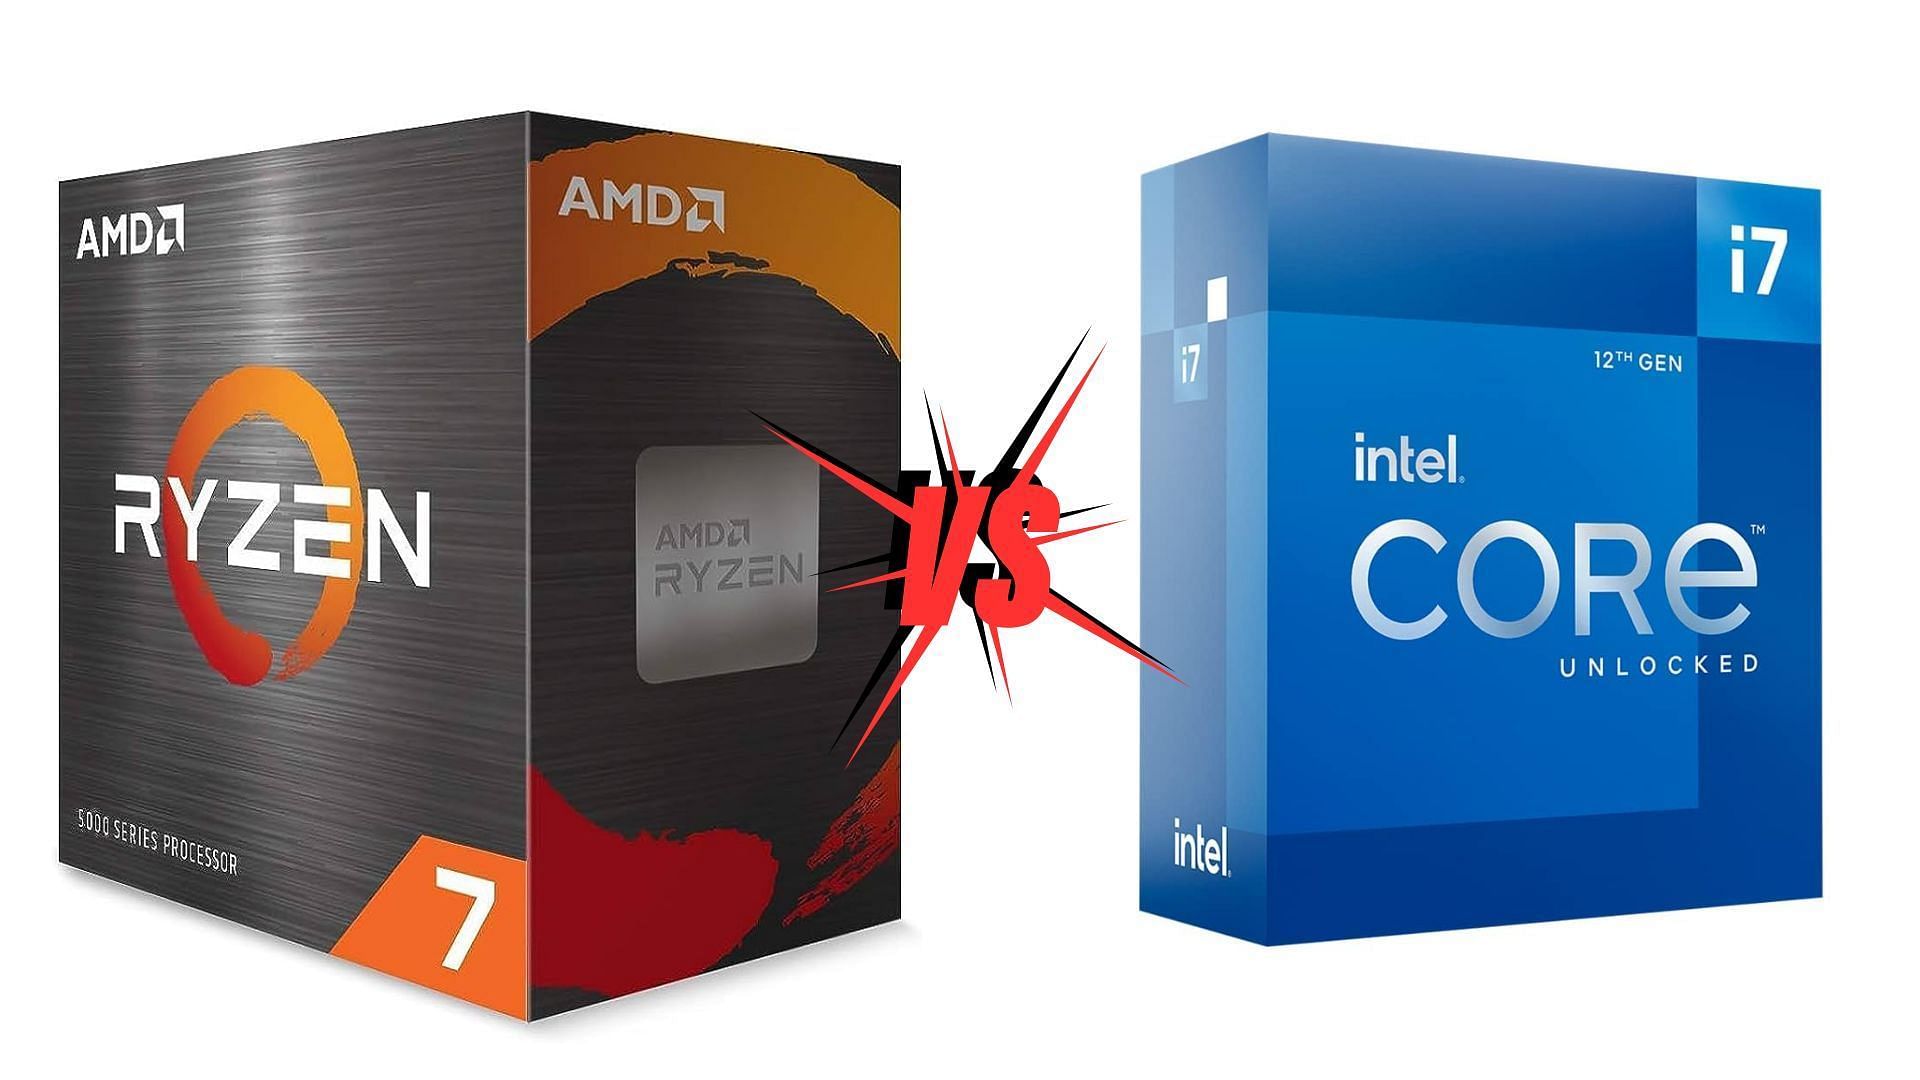 Which is a better gaming chipset AMD Ryzen 7 5800X or Intel Core i7-12700K 